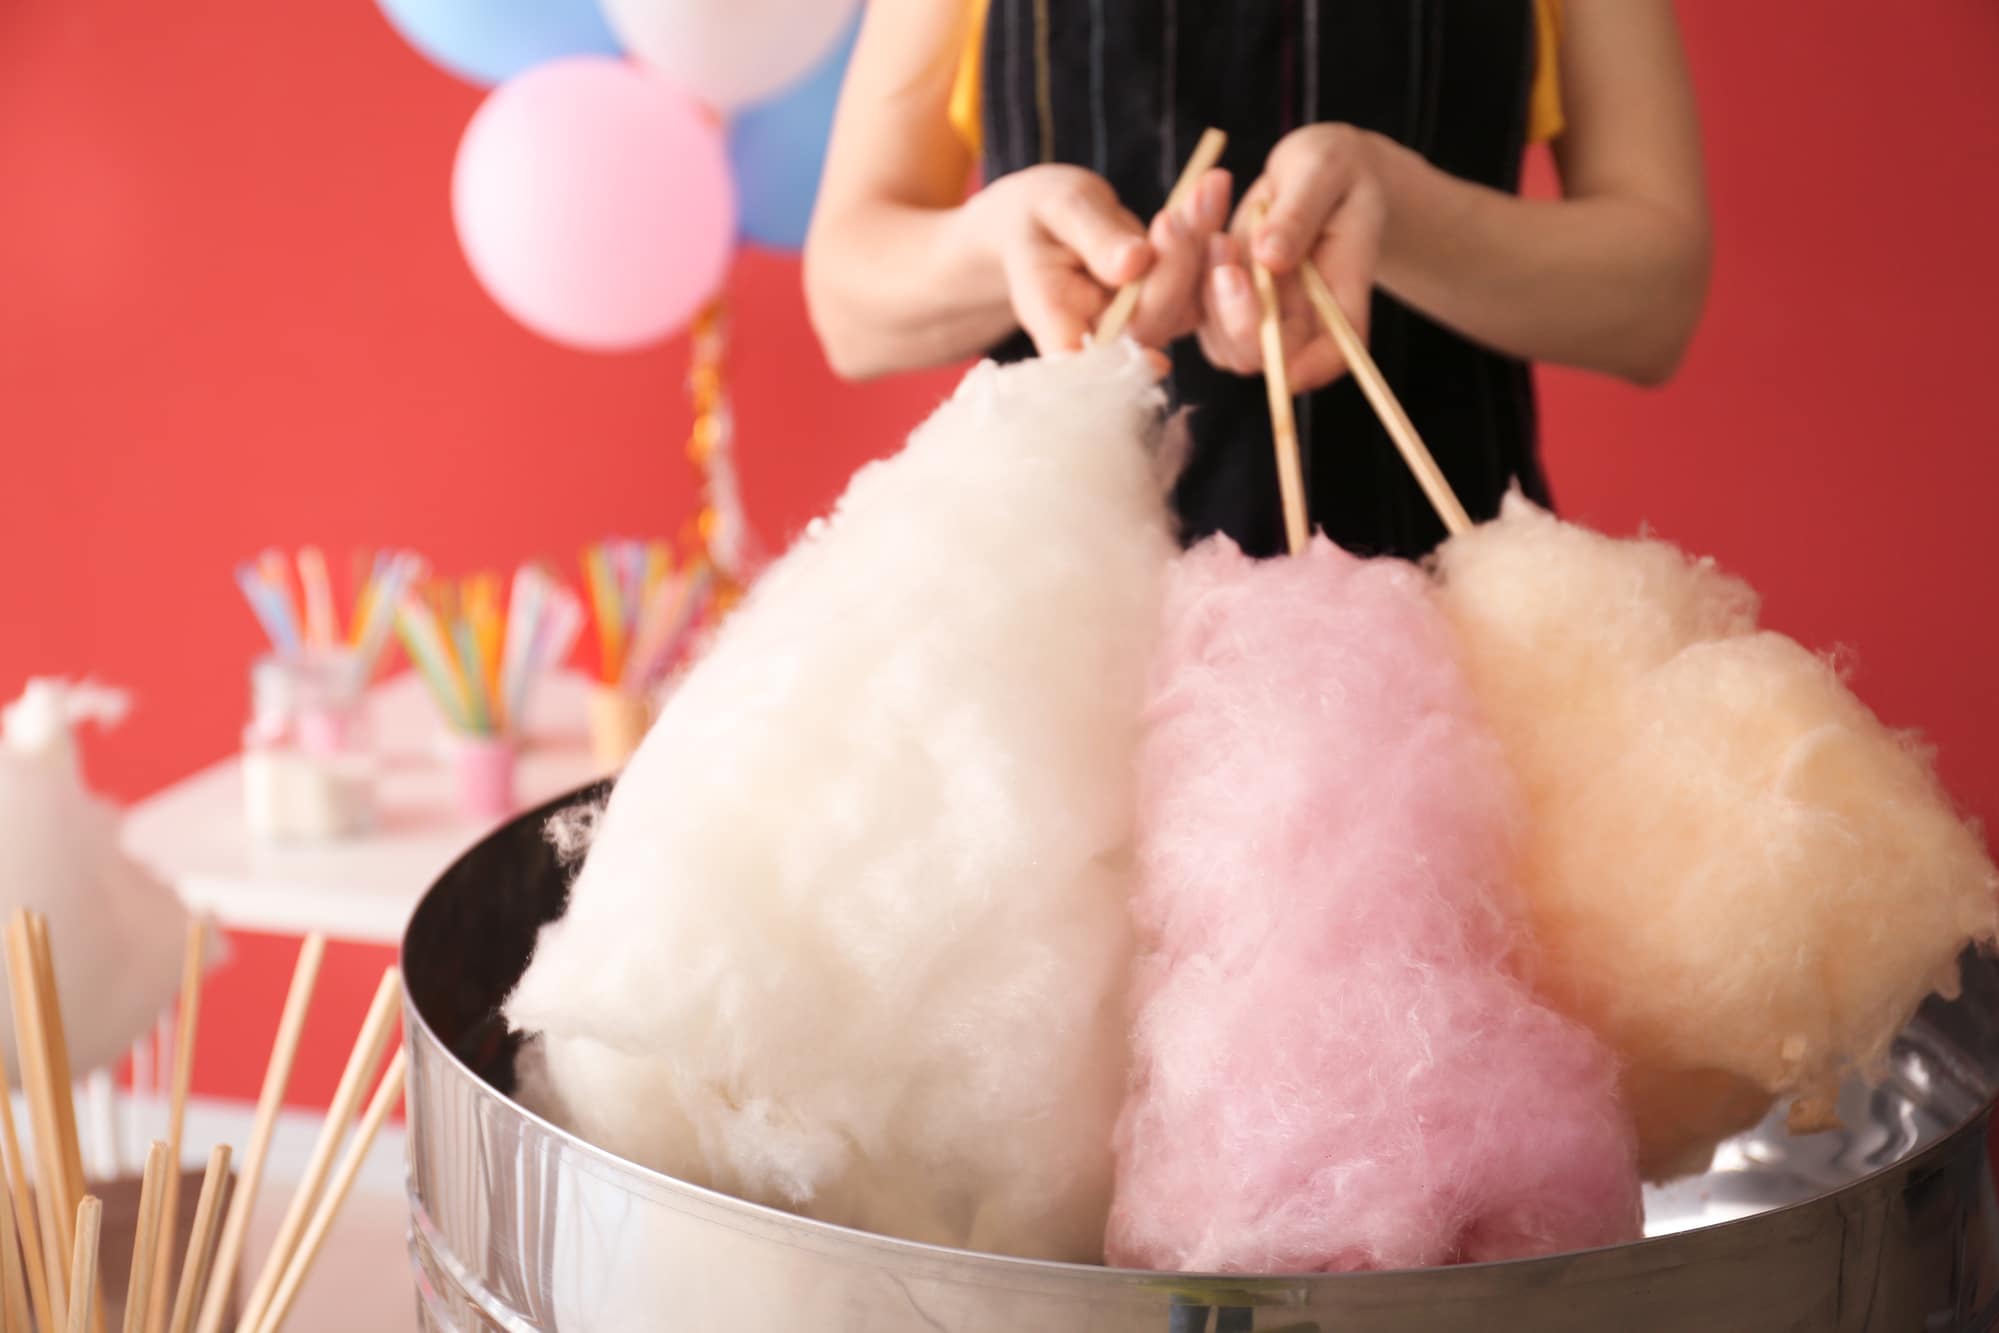 woman holding three sticks of cotton candy over machine